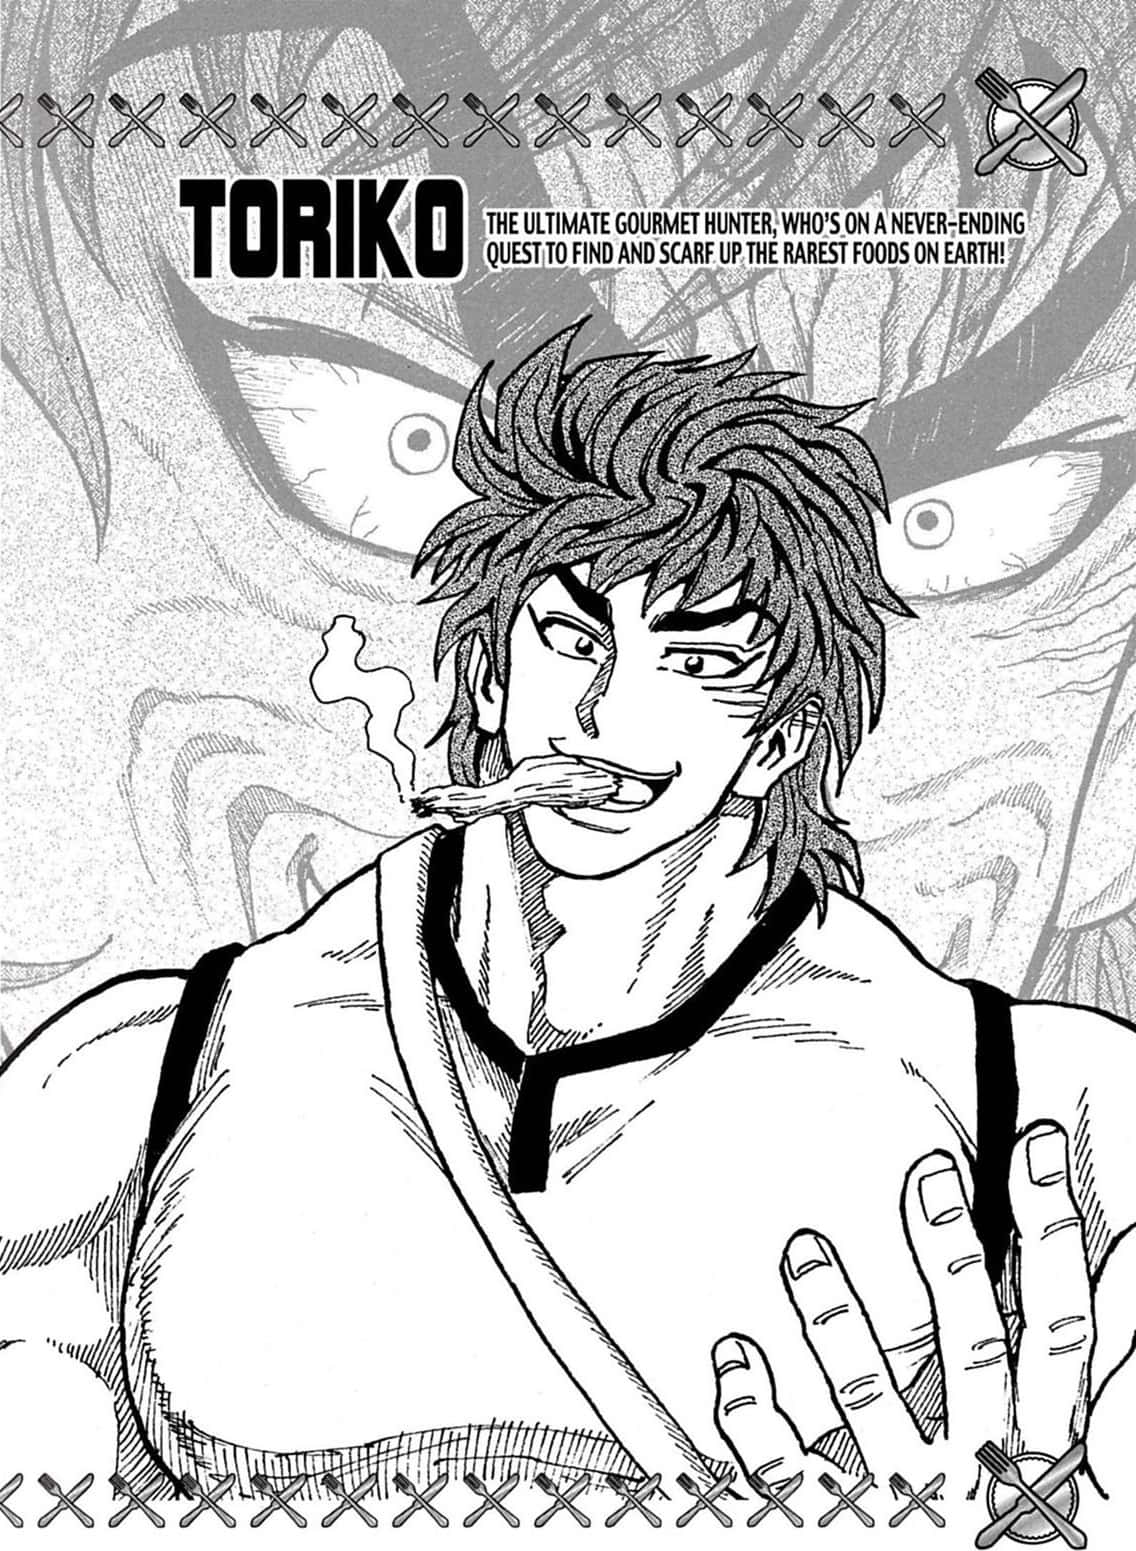 The proud and powerful Toriko, pushing the boundaries of strength and courage." Wallpaper